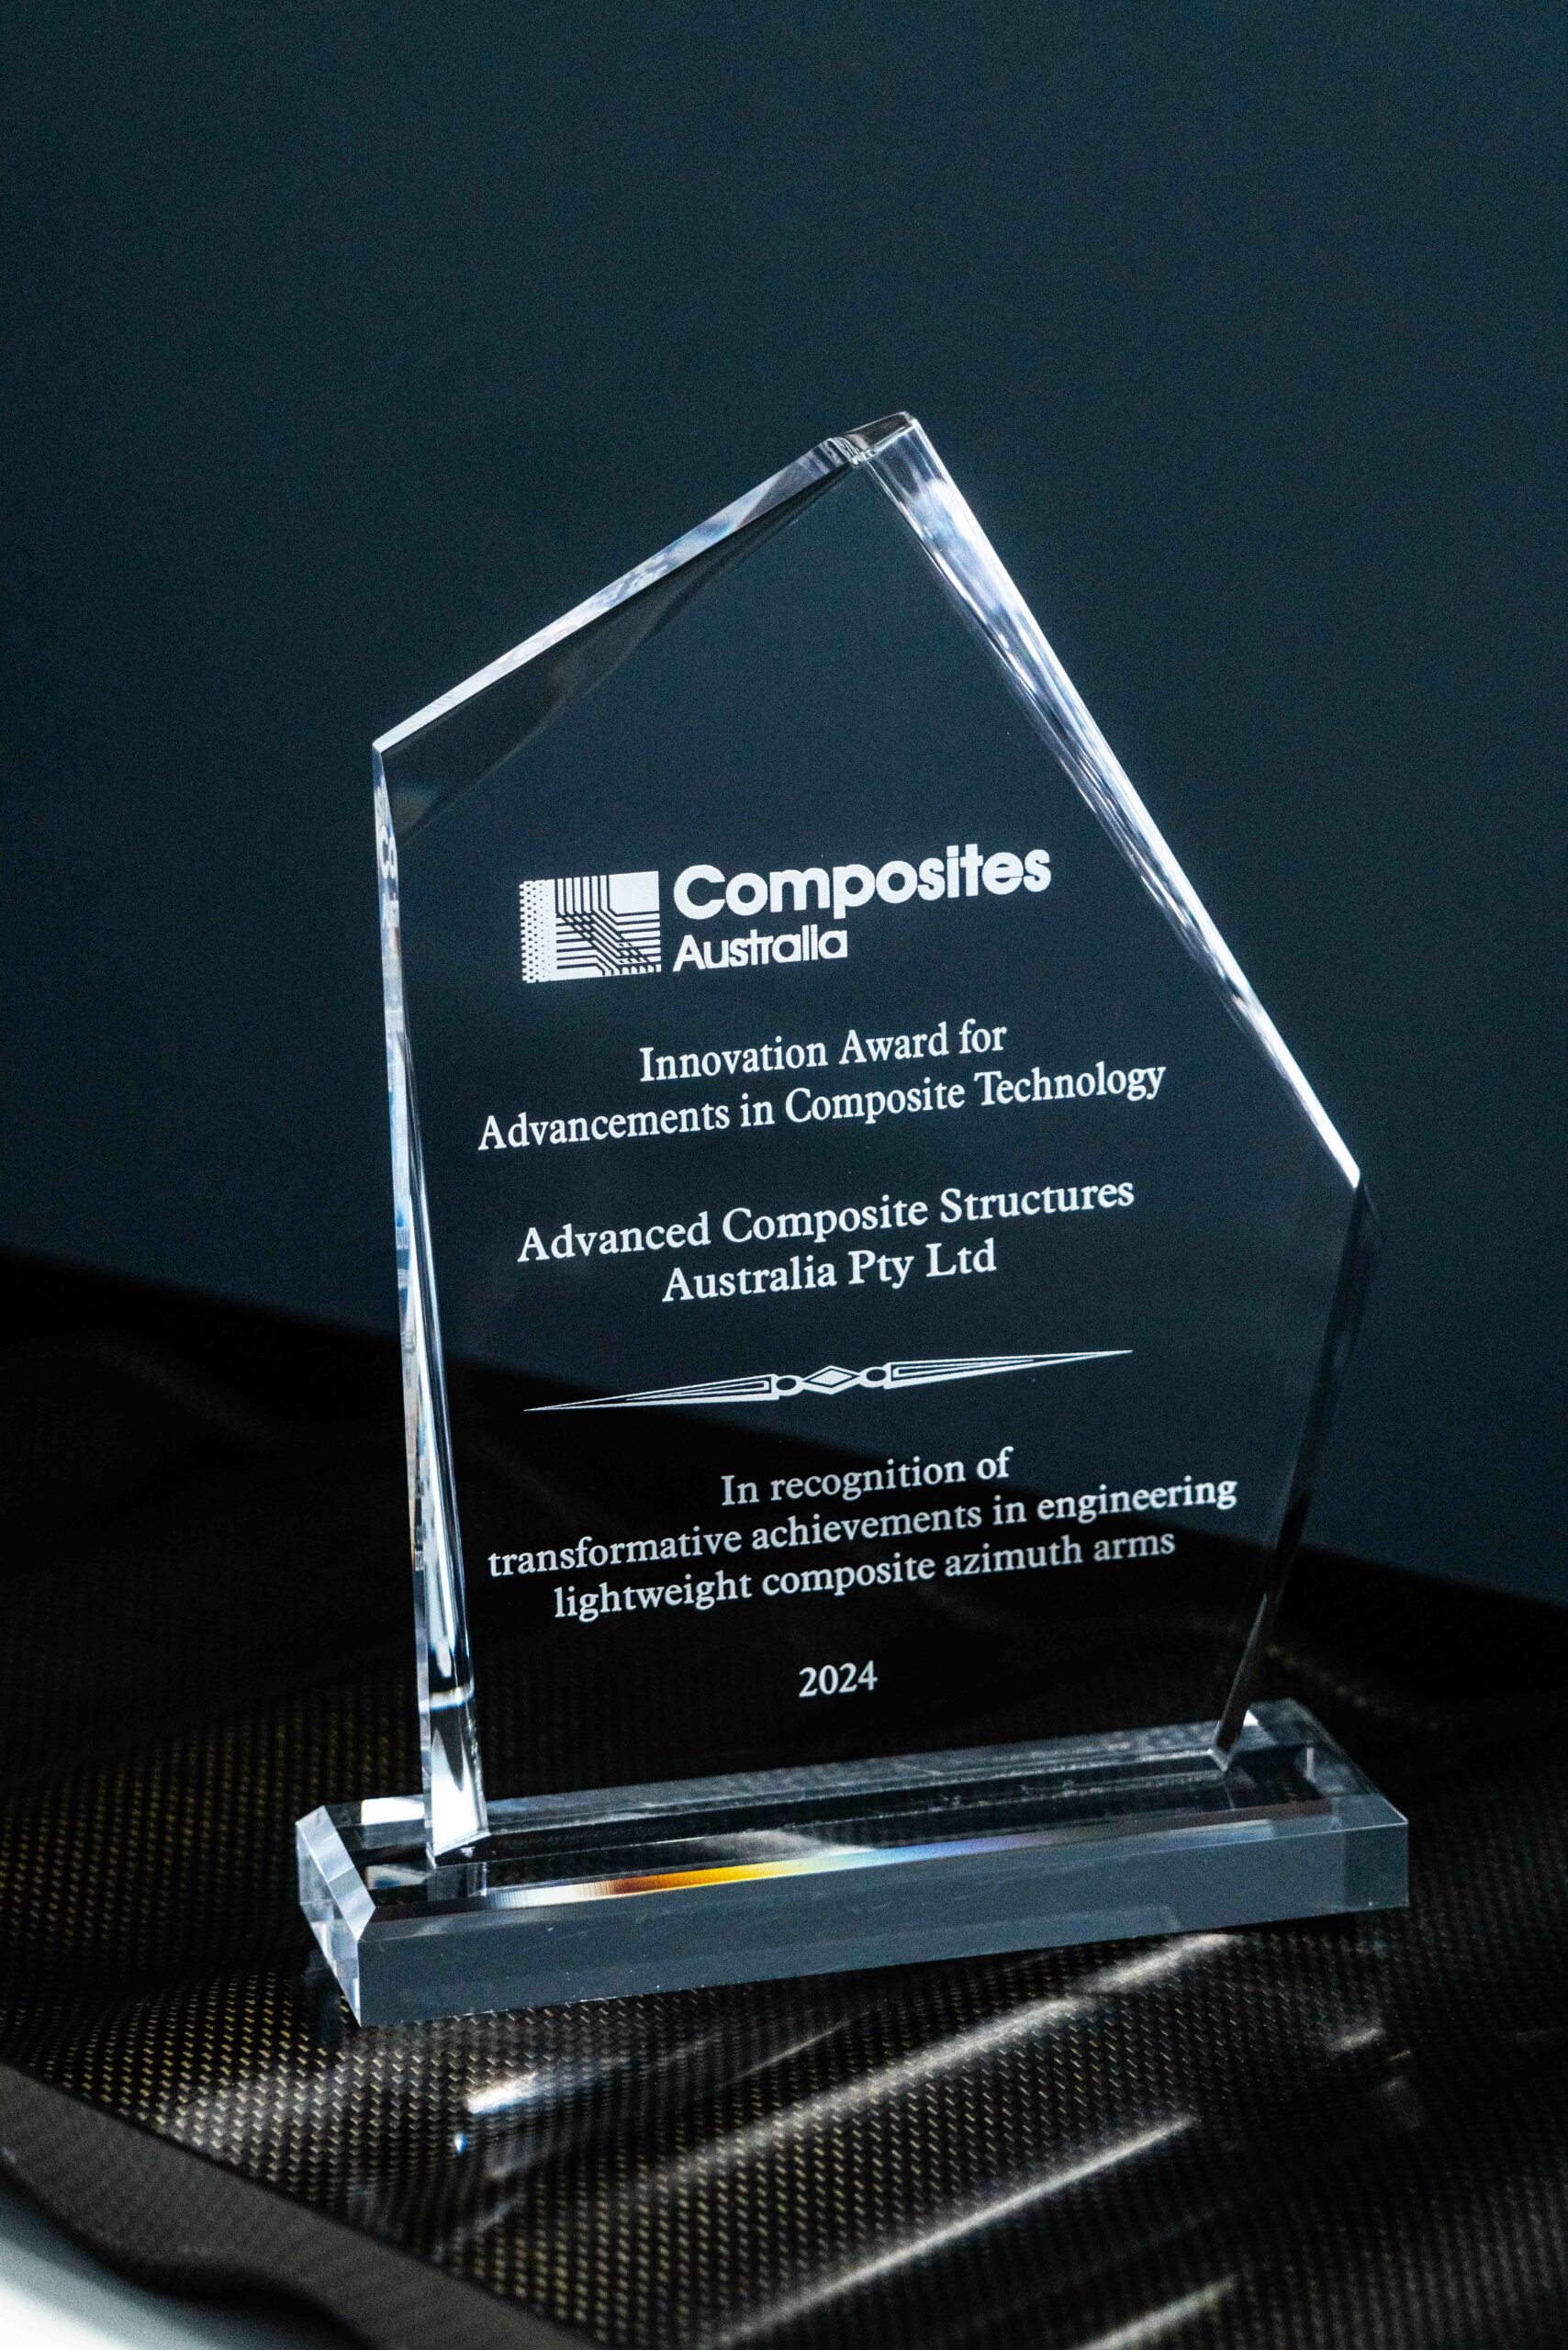 Composites Australia Innovation Award 2024 for Advancements in Composites - Advanced Composite Structures Australia Pty Ltd. In recognition of transformative achievements in engineering light-weight composite azimuth arms 2024